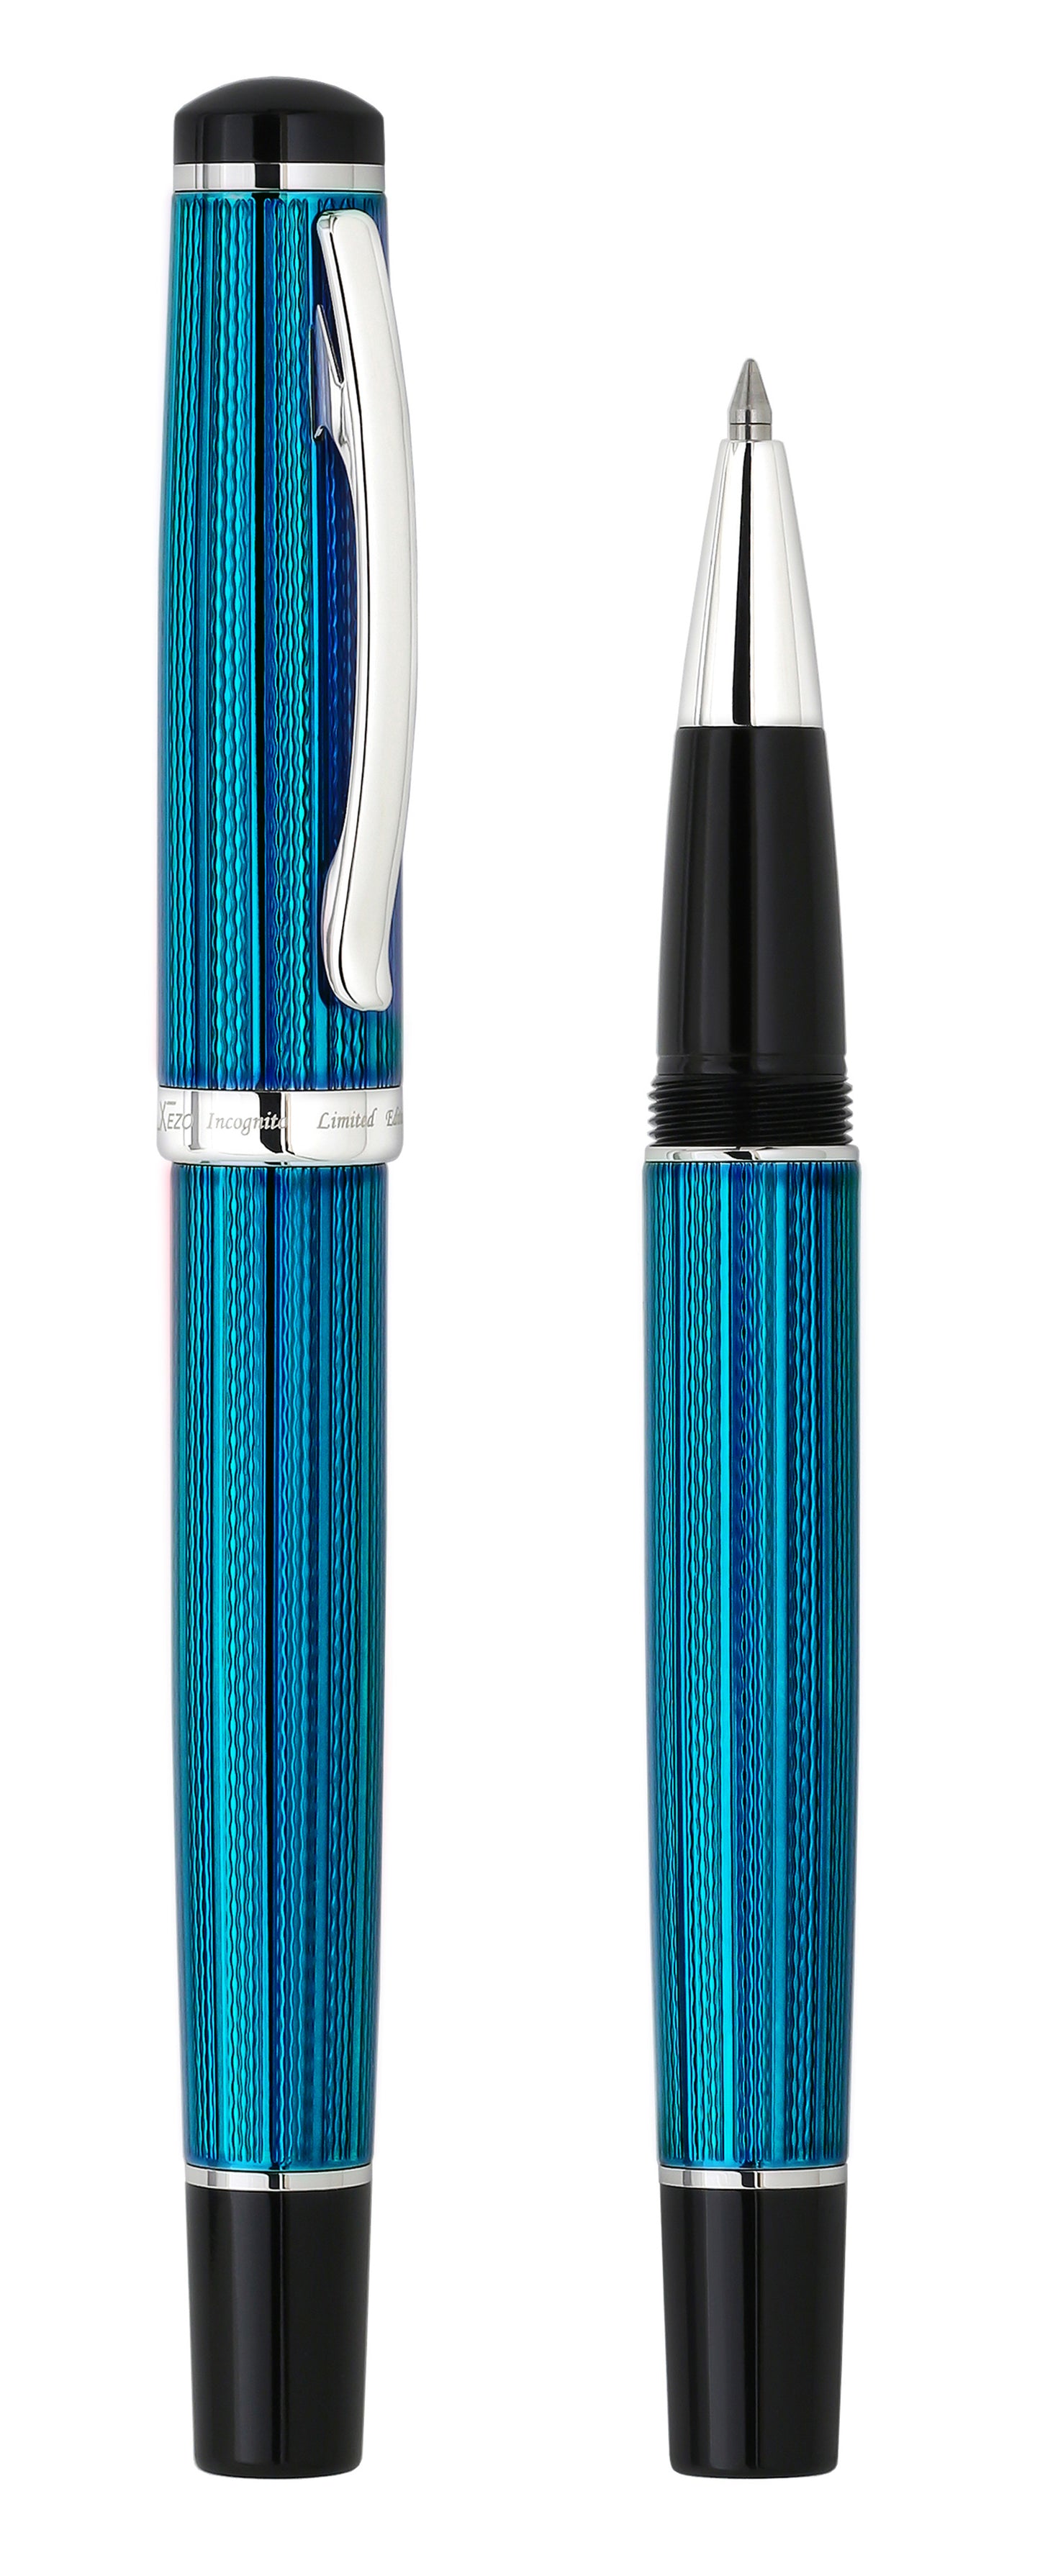 Xezo - Comparison between the capped and uncapped Incognito Blue R-1 rollerball pen